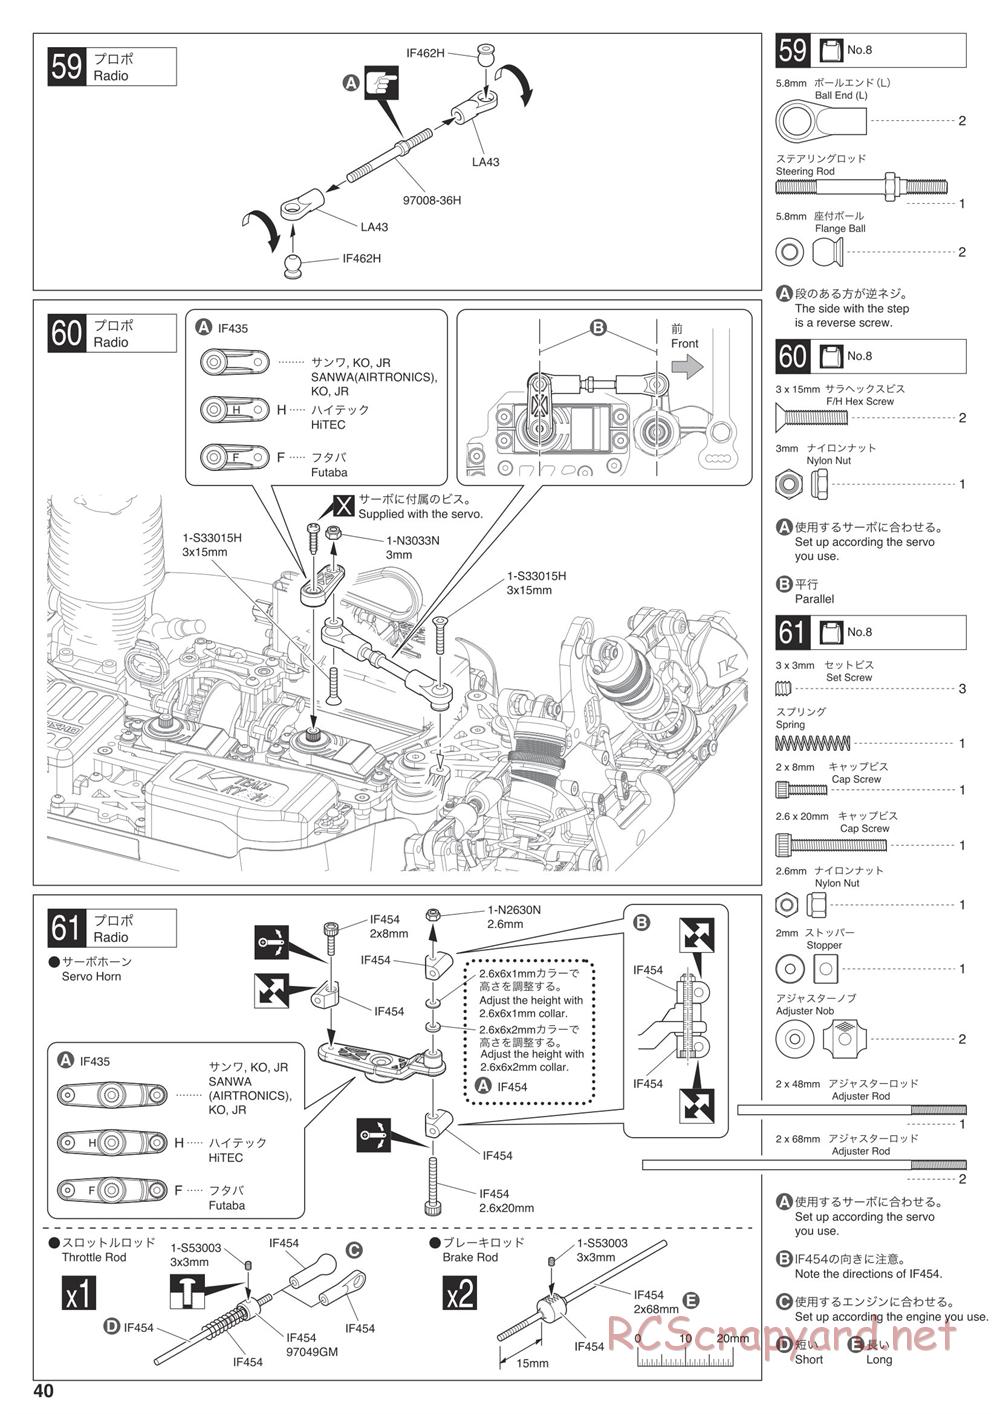 Kyosho - Inferno MP10 - Manual - Page 40